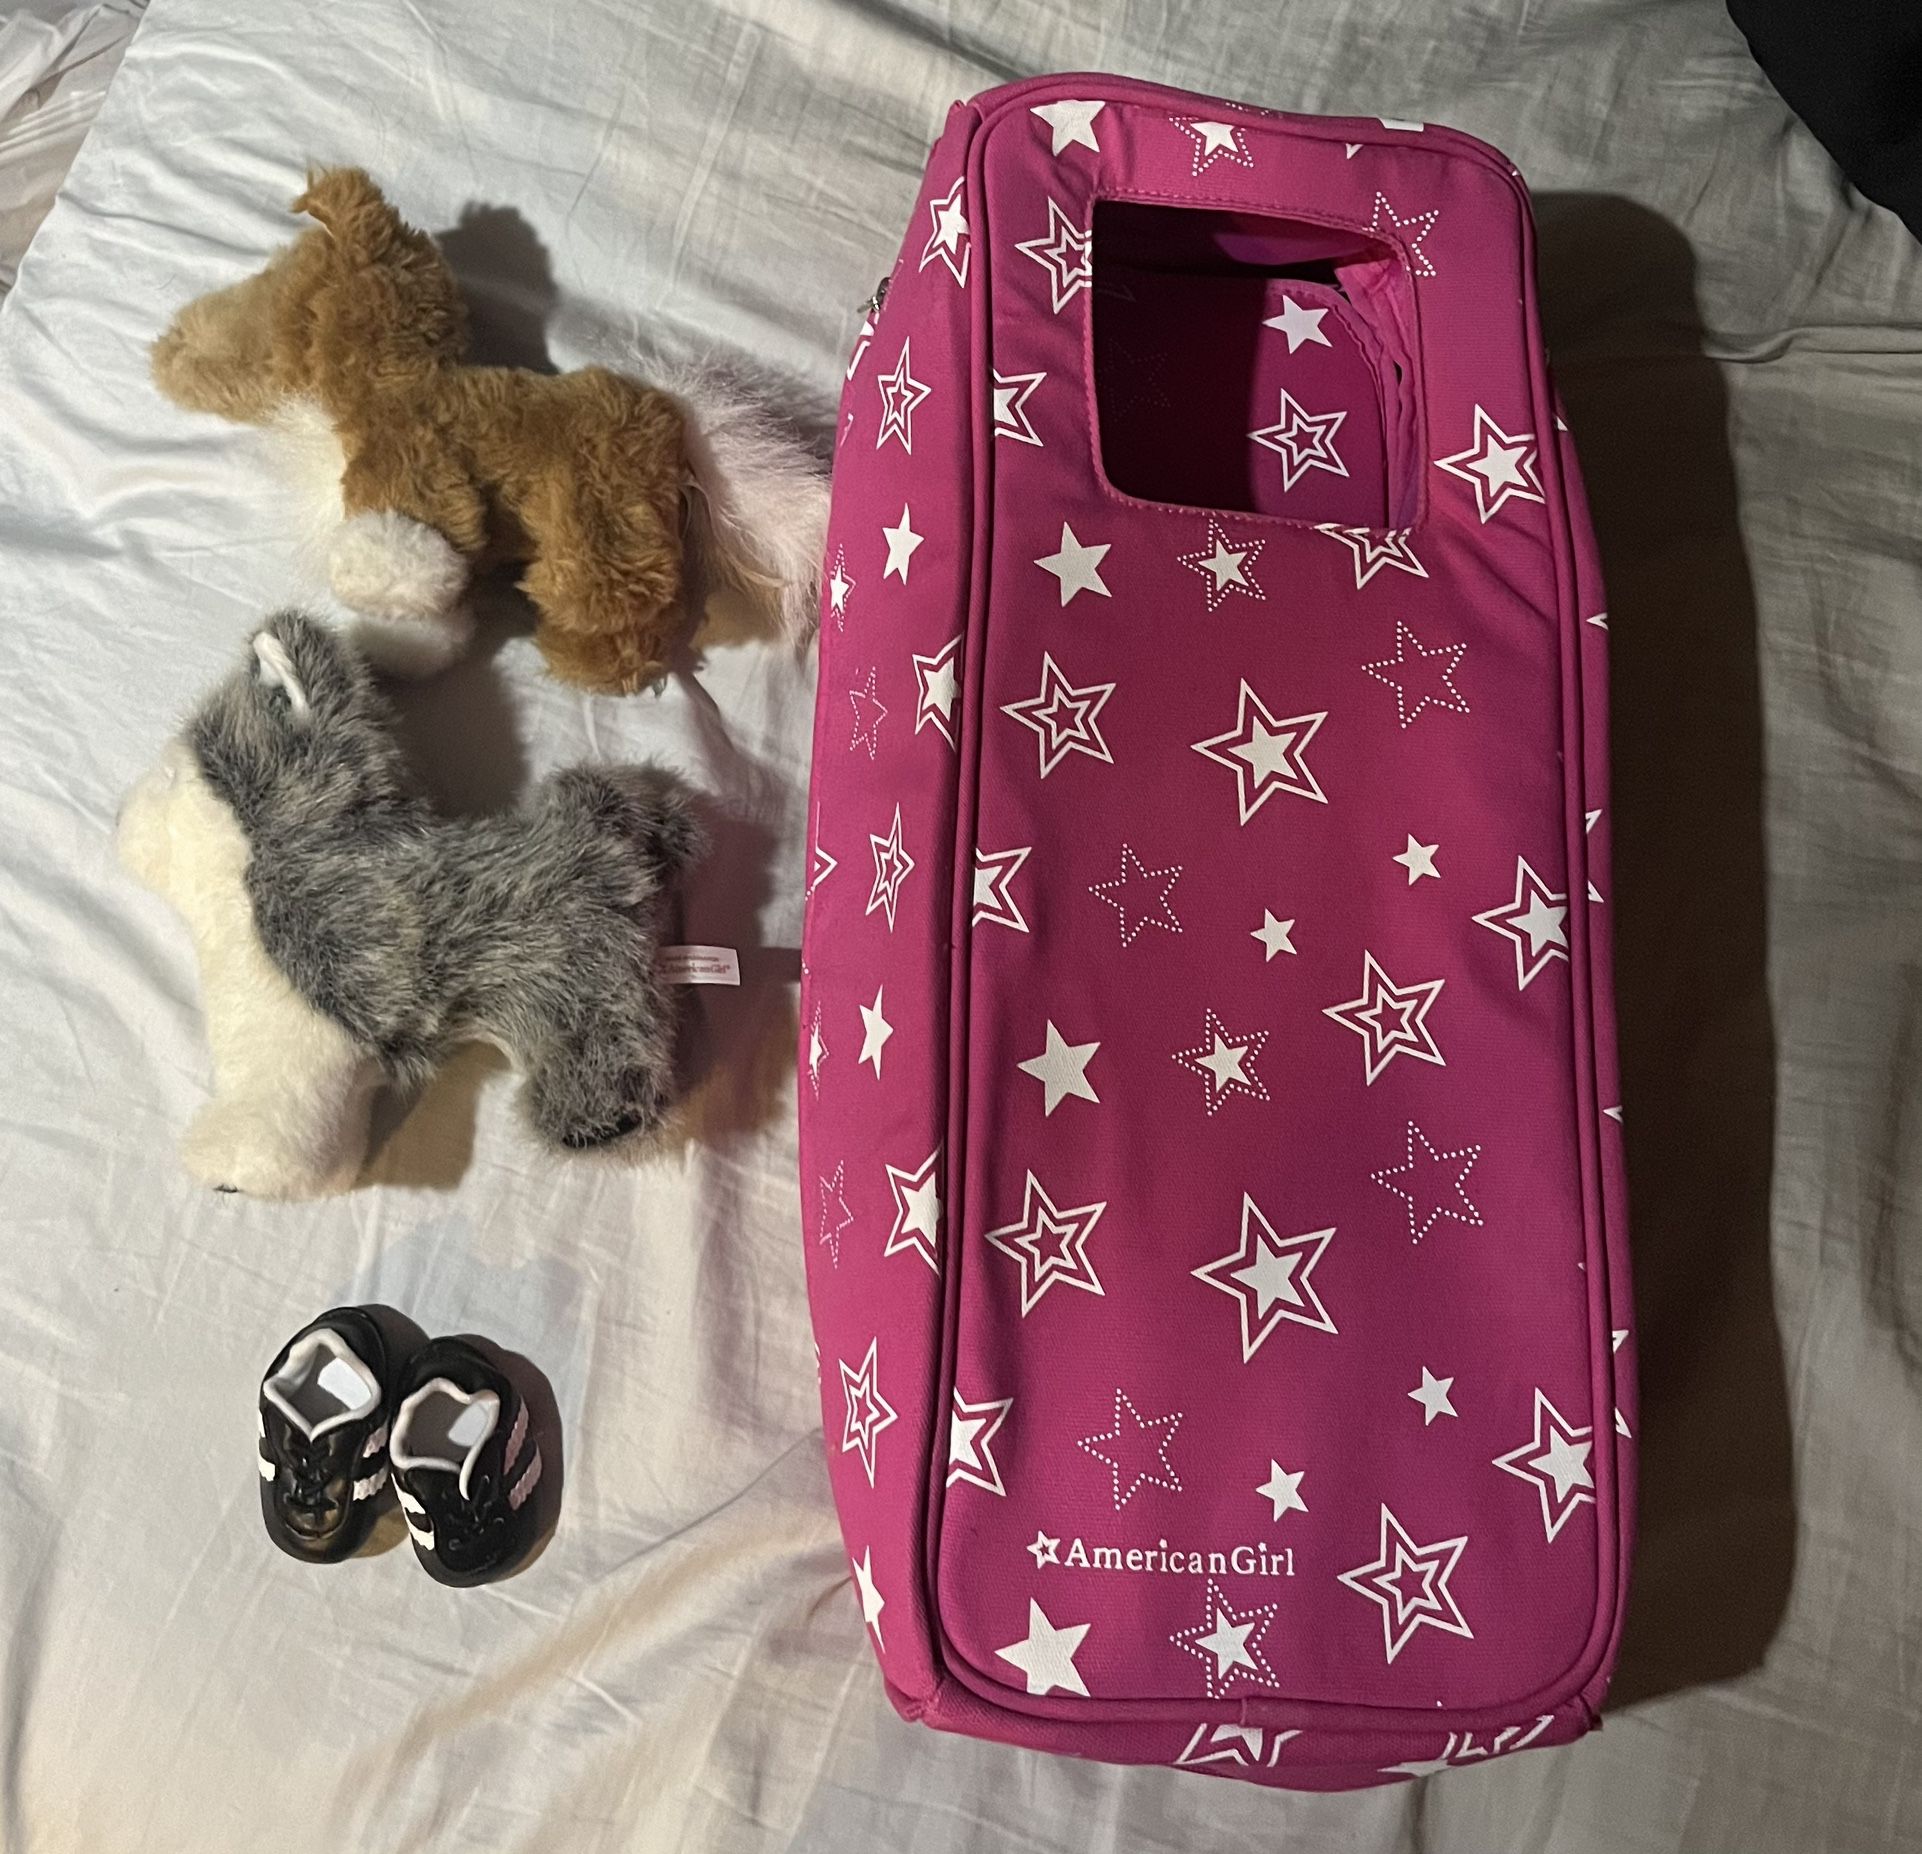 American Girldoll Carrying case w/ dogs and cleats